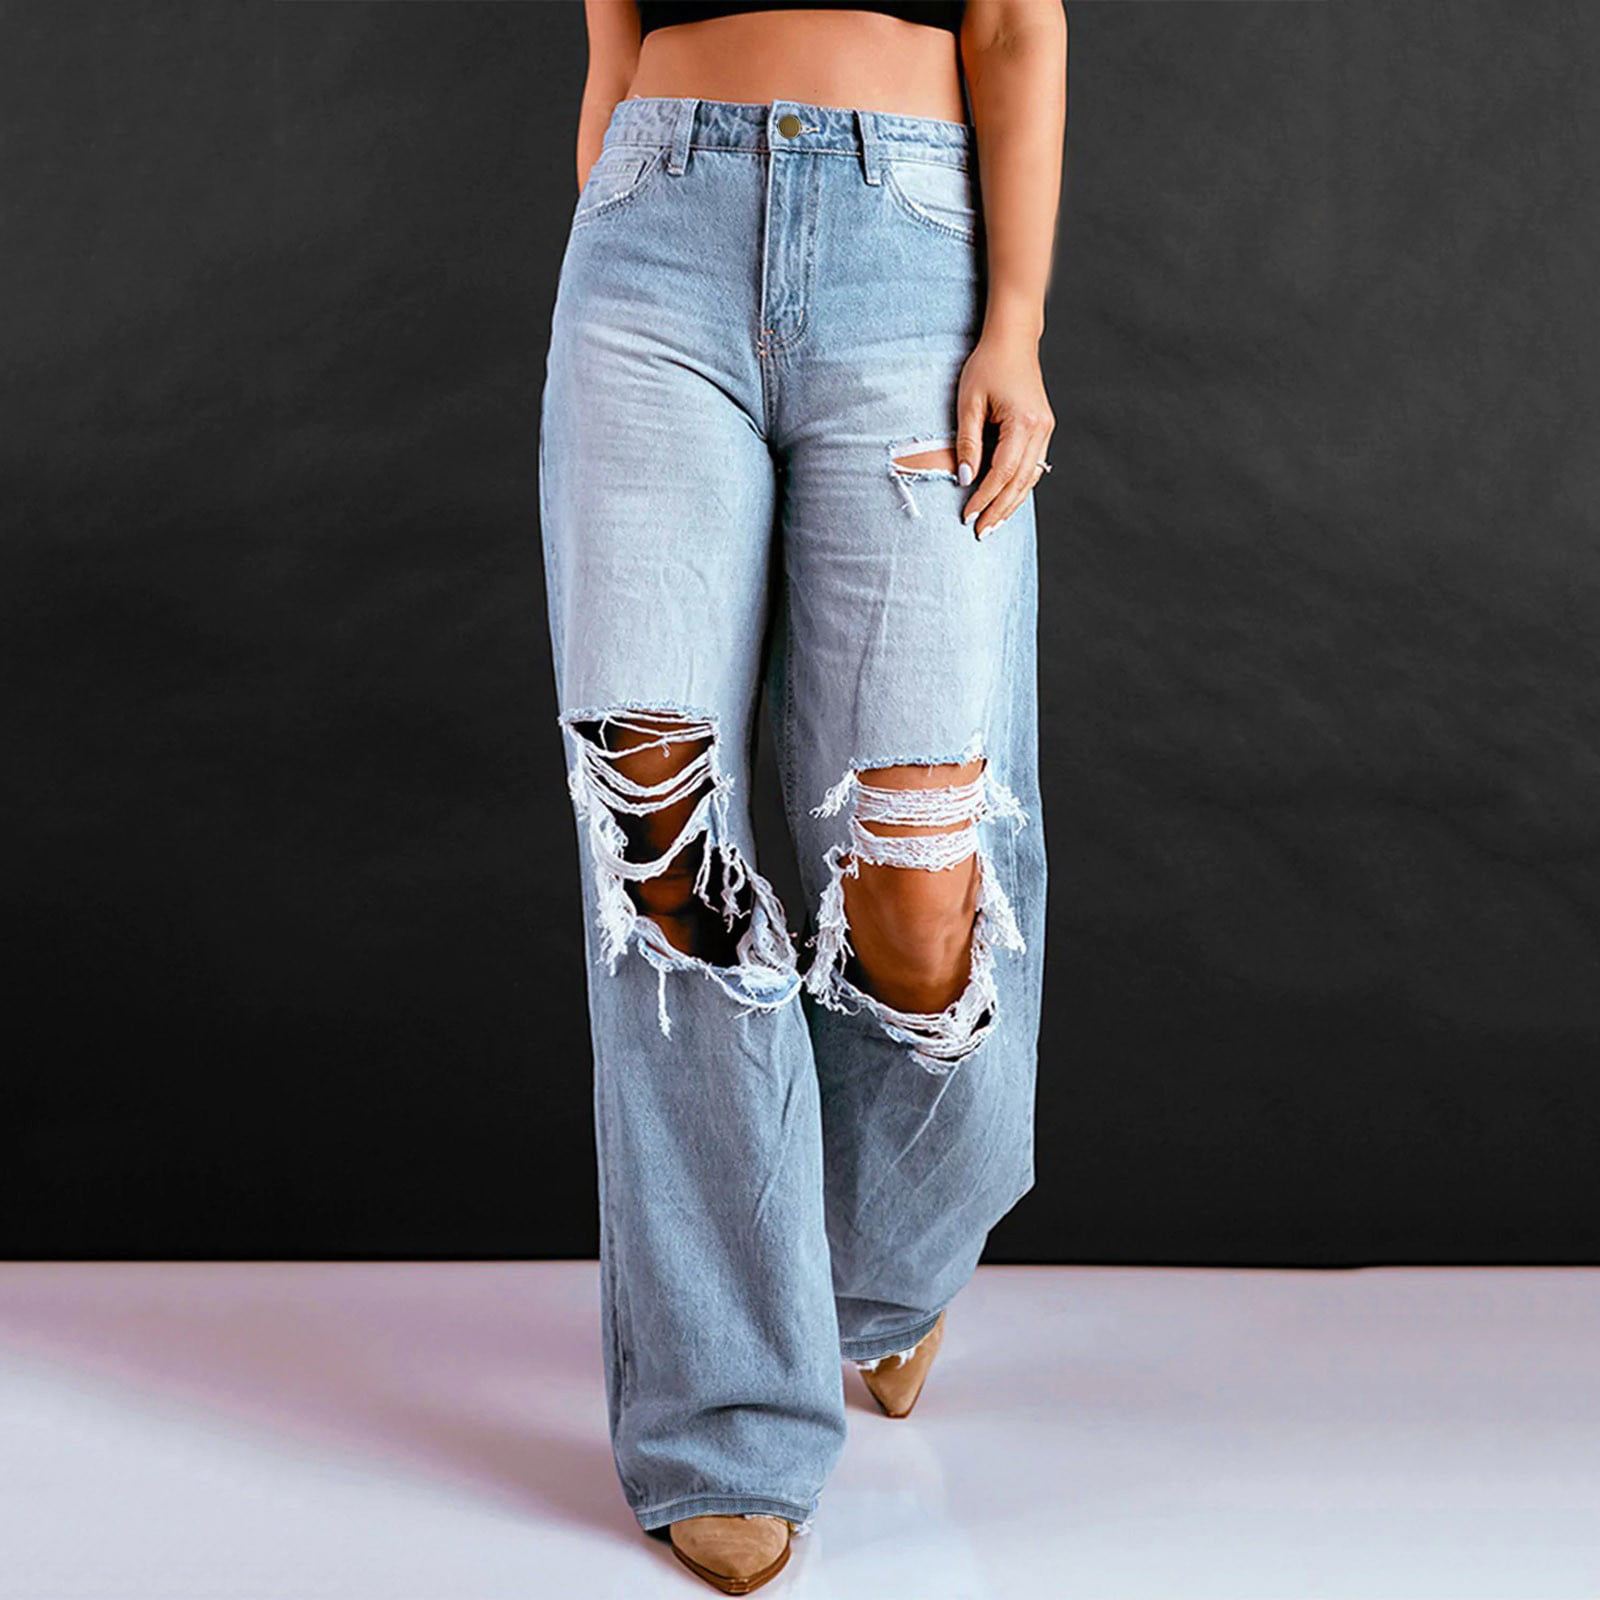 Sky Blue Vintage Distressed Ripped Wide Leg Jeans